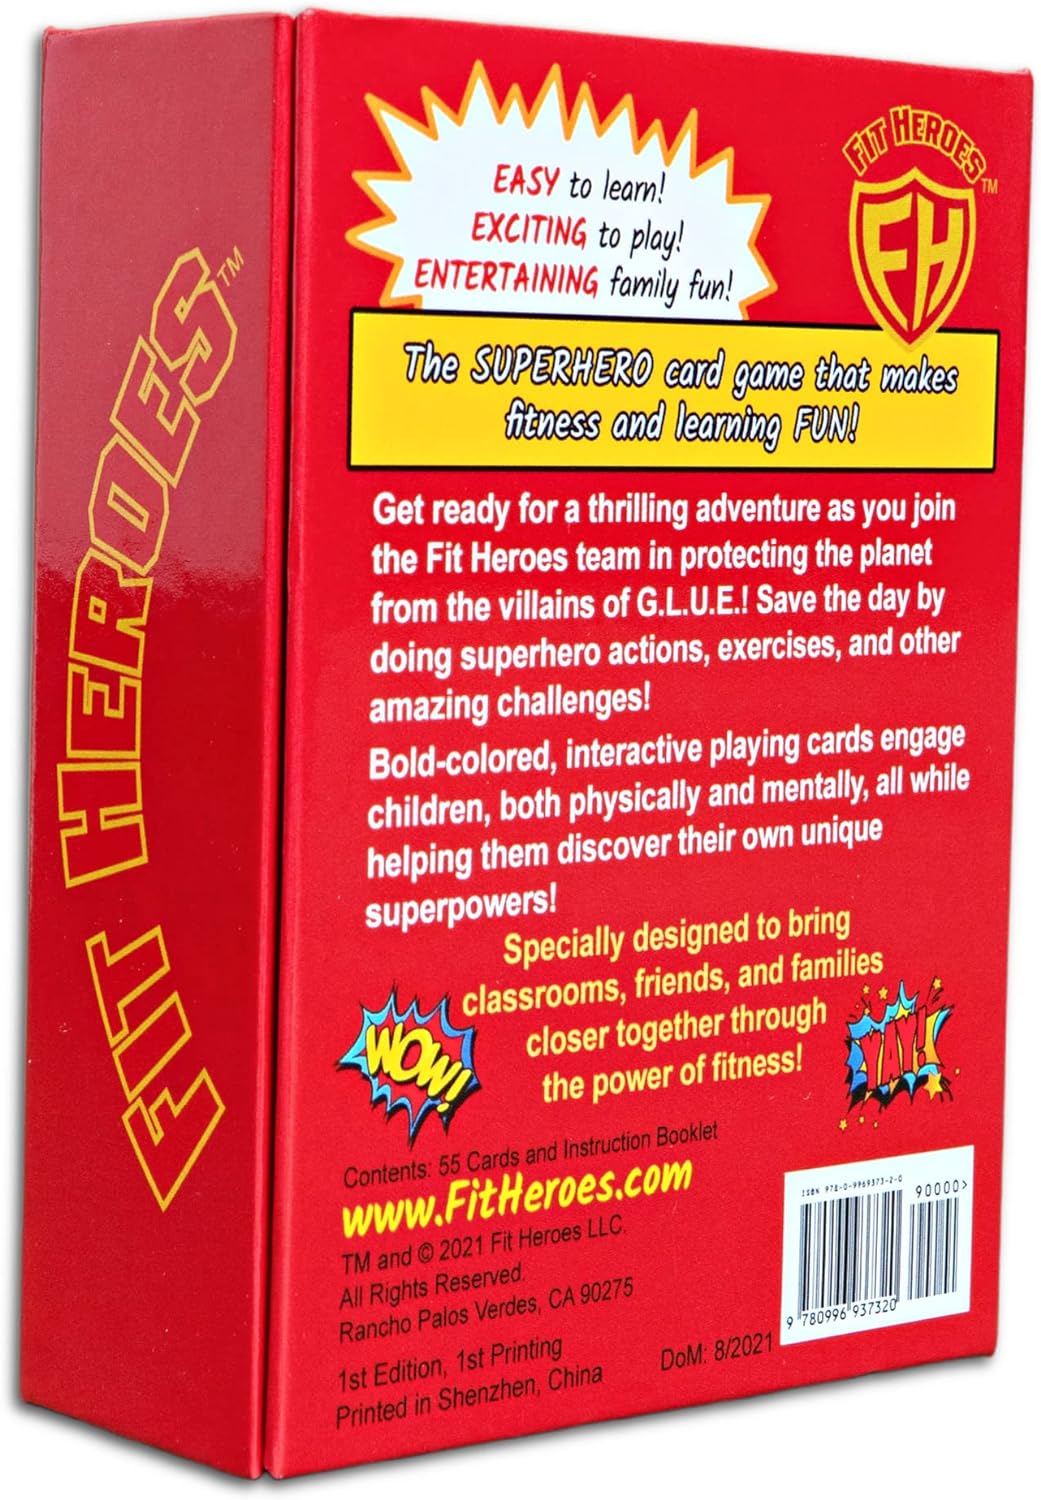 Fit Heroes: A Fitness Adventure Game for Kids | Family-Friendly Card Game | Award-Winning Superhero Game | Educational Exercise Playing Cards | Ages 5+